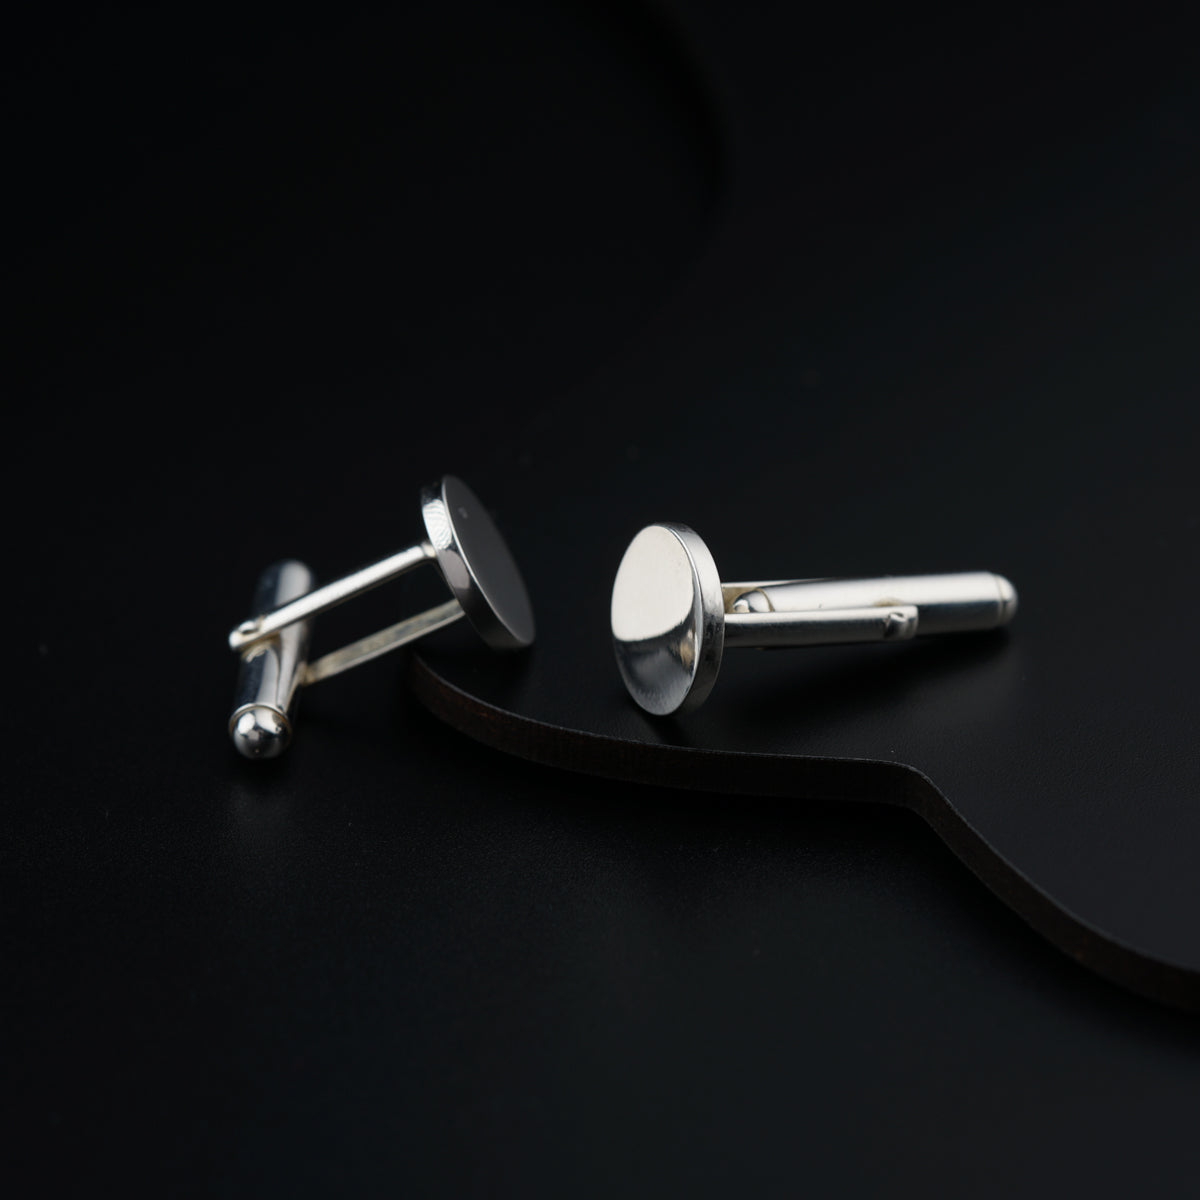 a pair of silver cufflinks on a black surface